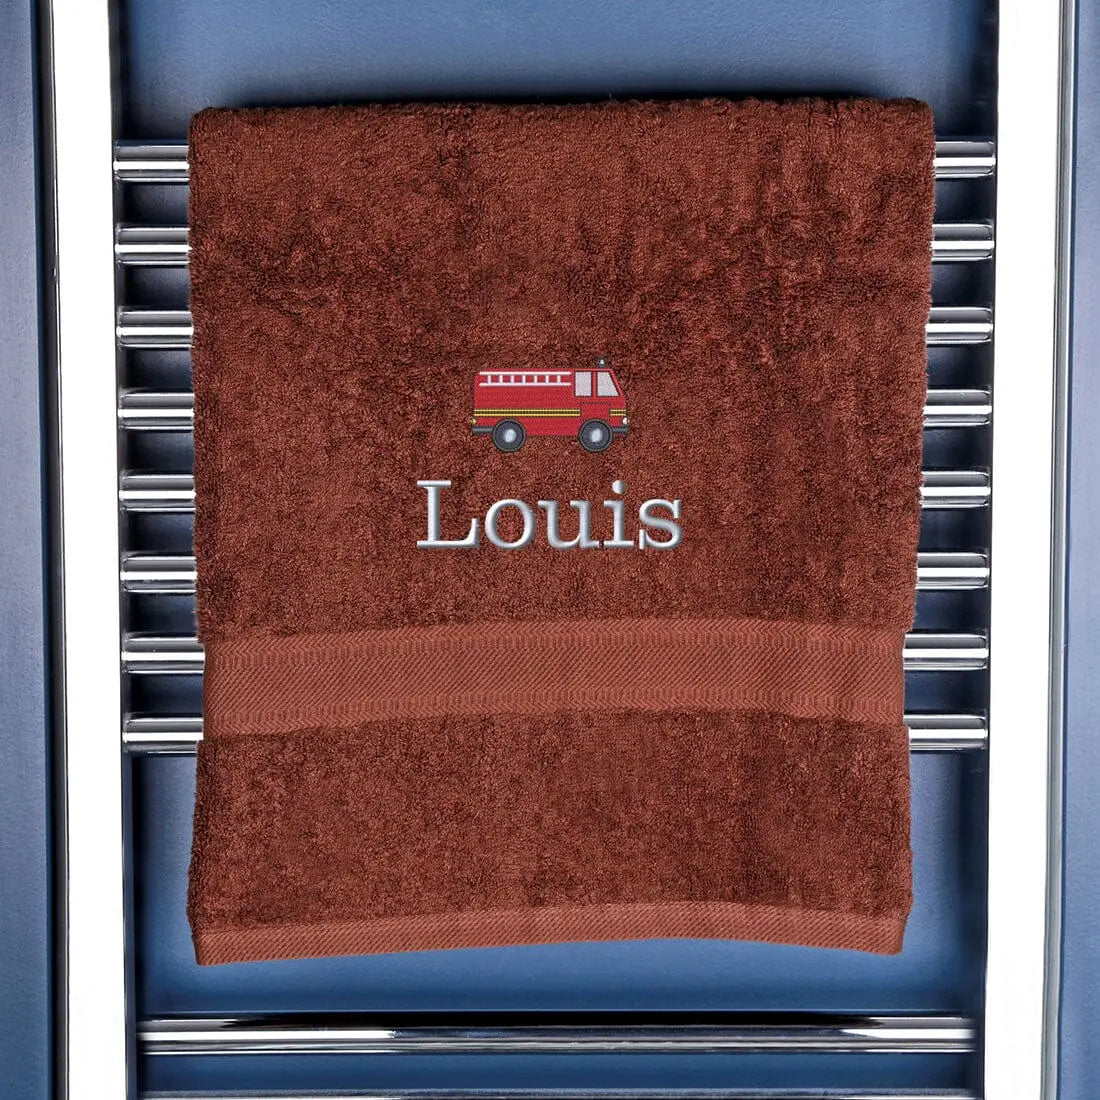 Children's Personalised Fire Engine Bath Towel Egyptian - Chocolate  